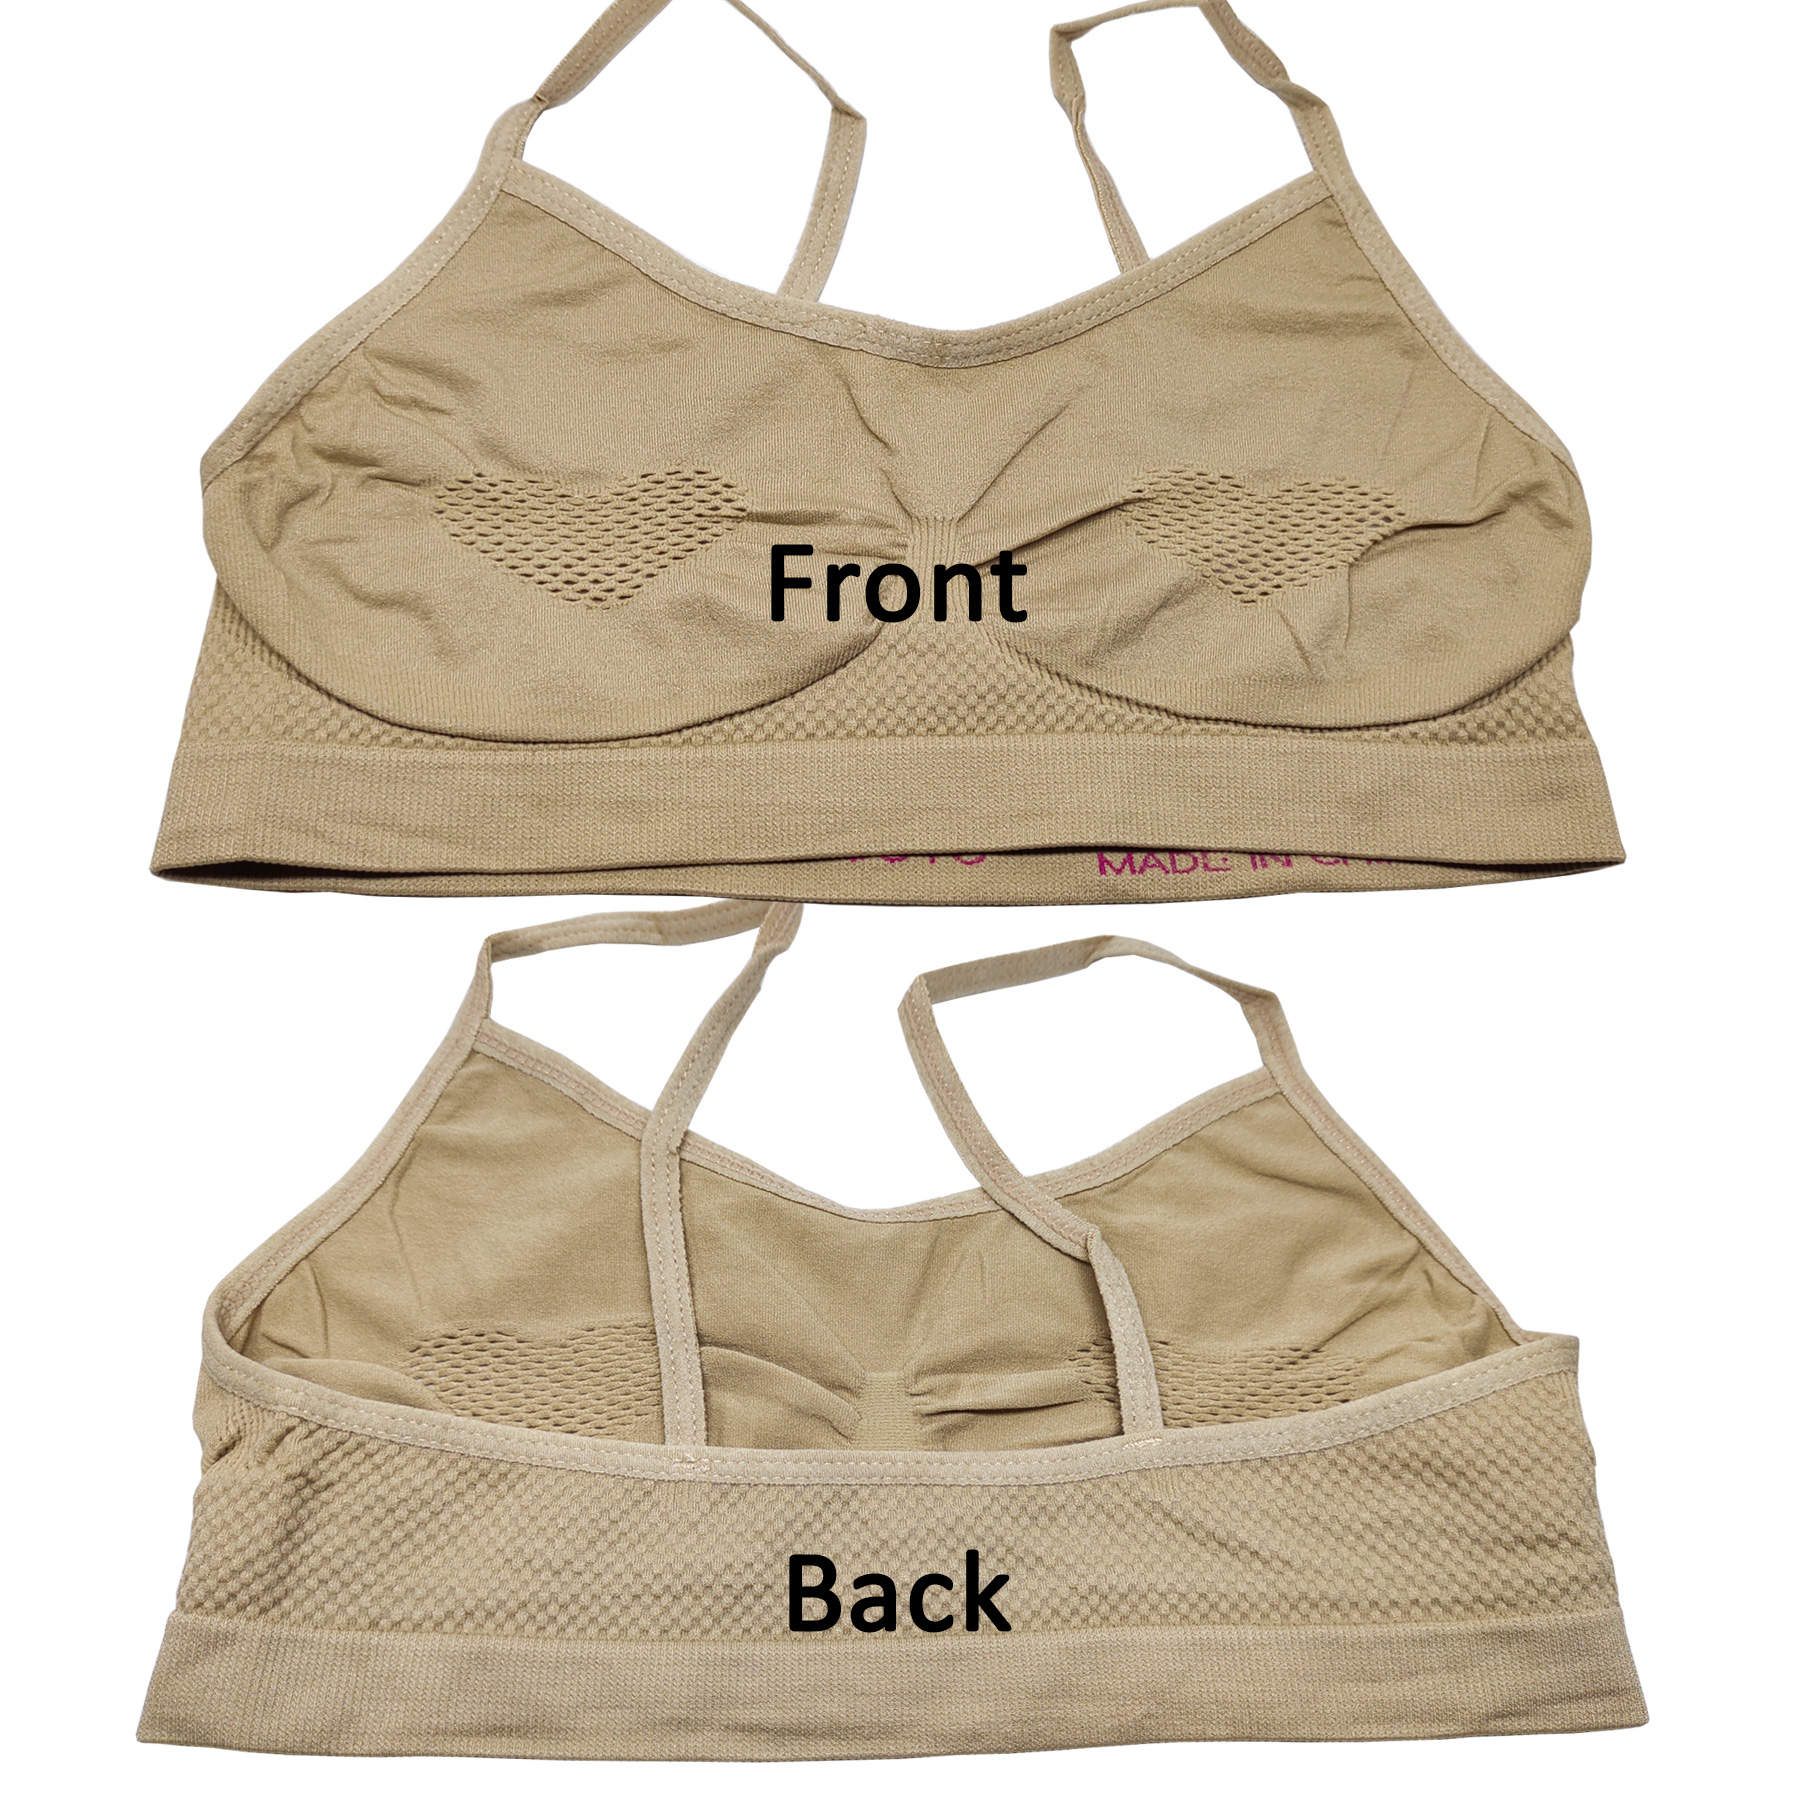 Free-Sized Teenage Girl Training Bras for Girls and Young Women Non Padded  Soft Cute Bralette Underwear for Puberty Girls 9-18 Years in Skin and Black  Blouse for Women